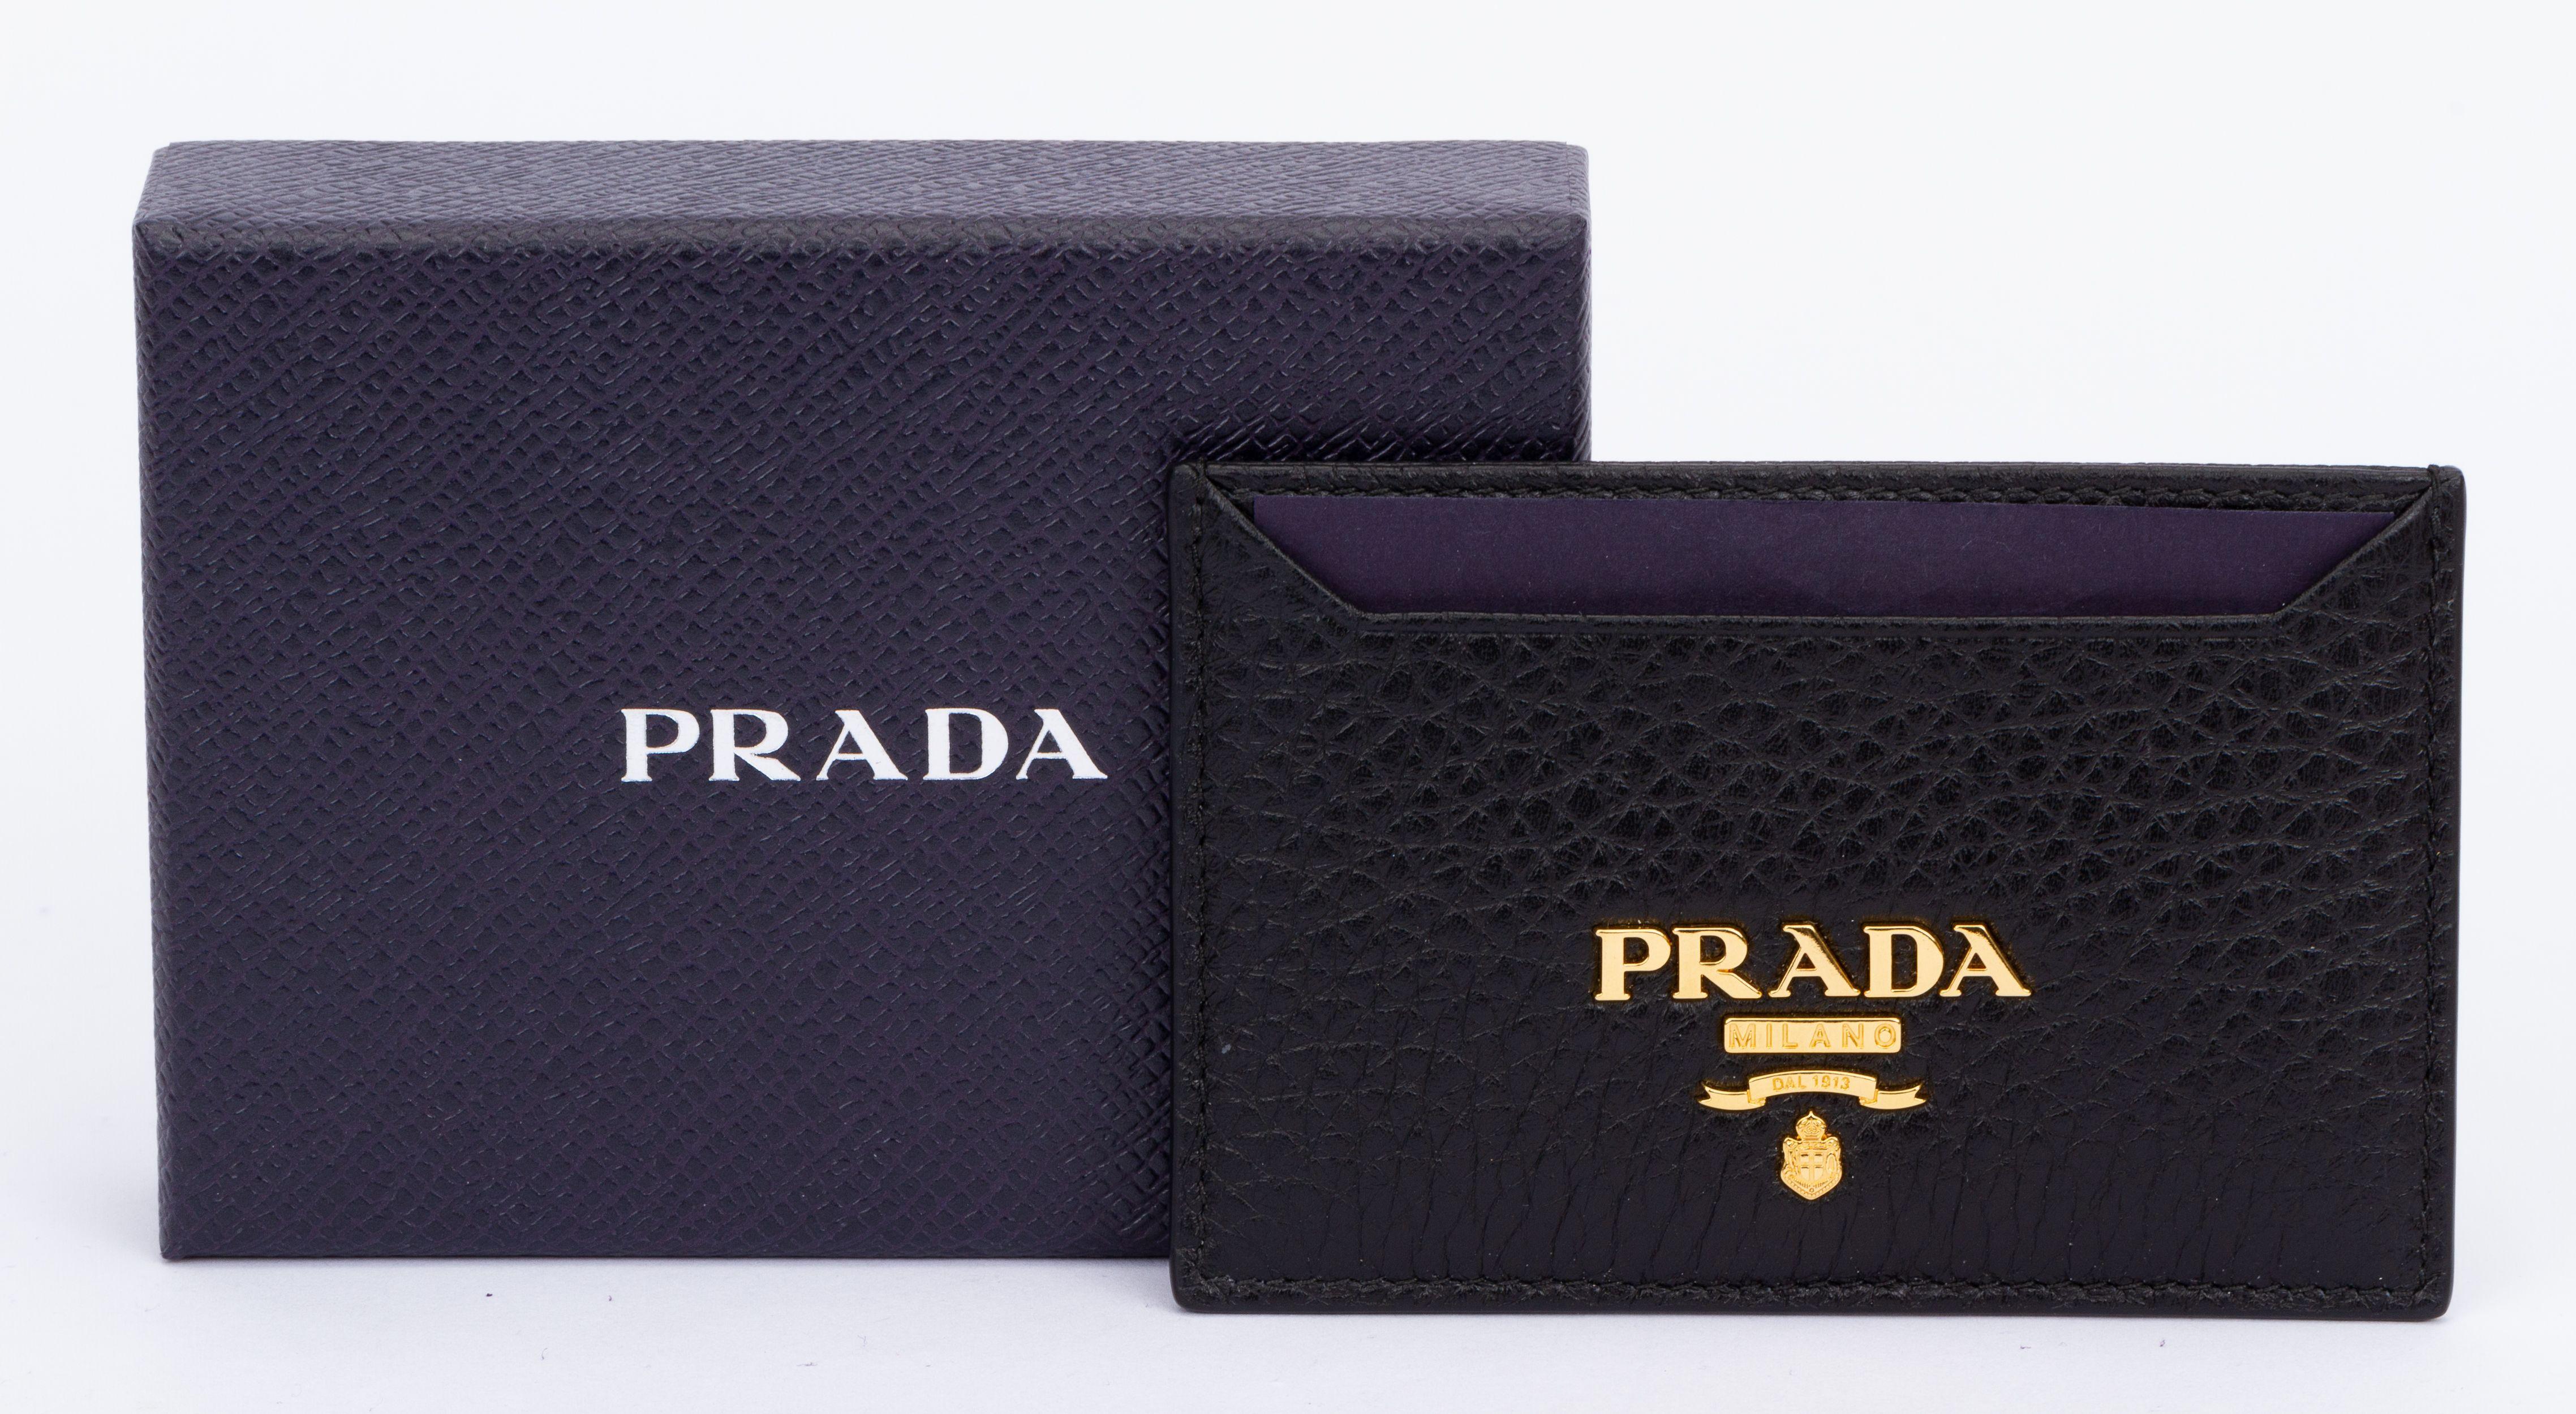 Prada card holder in black This slim, stylish calf leather credit card holder offers three compartments with a contrasting color lining. Its chic gold-finish hardware pairs with a metal lettering logo to finish. The piece is brand new and includes